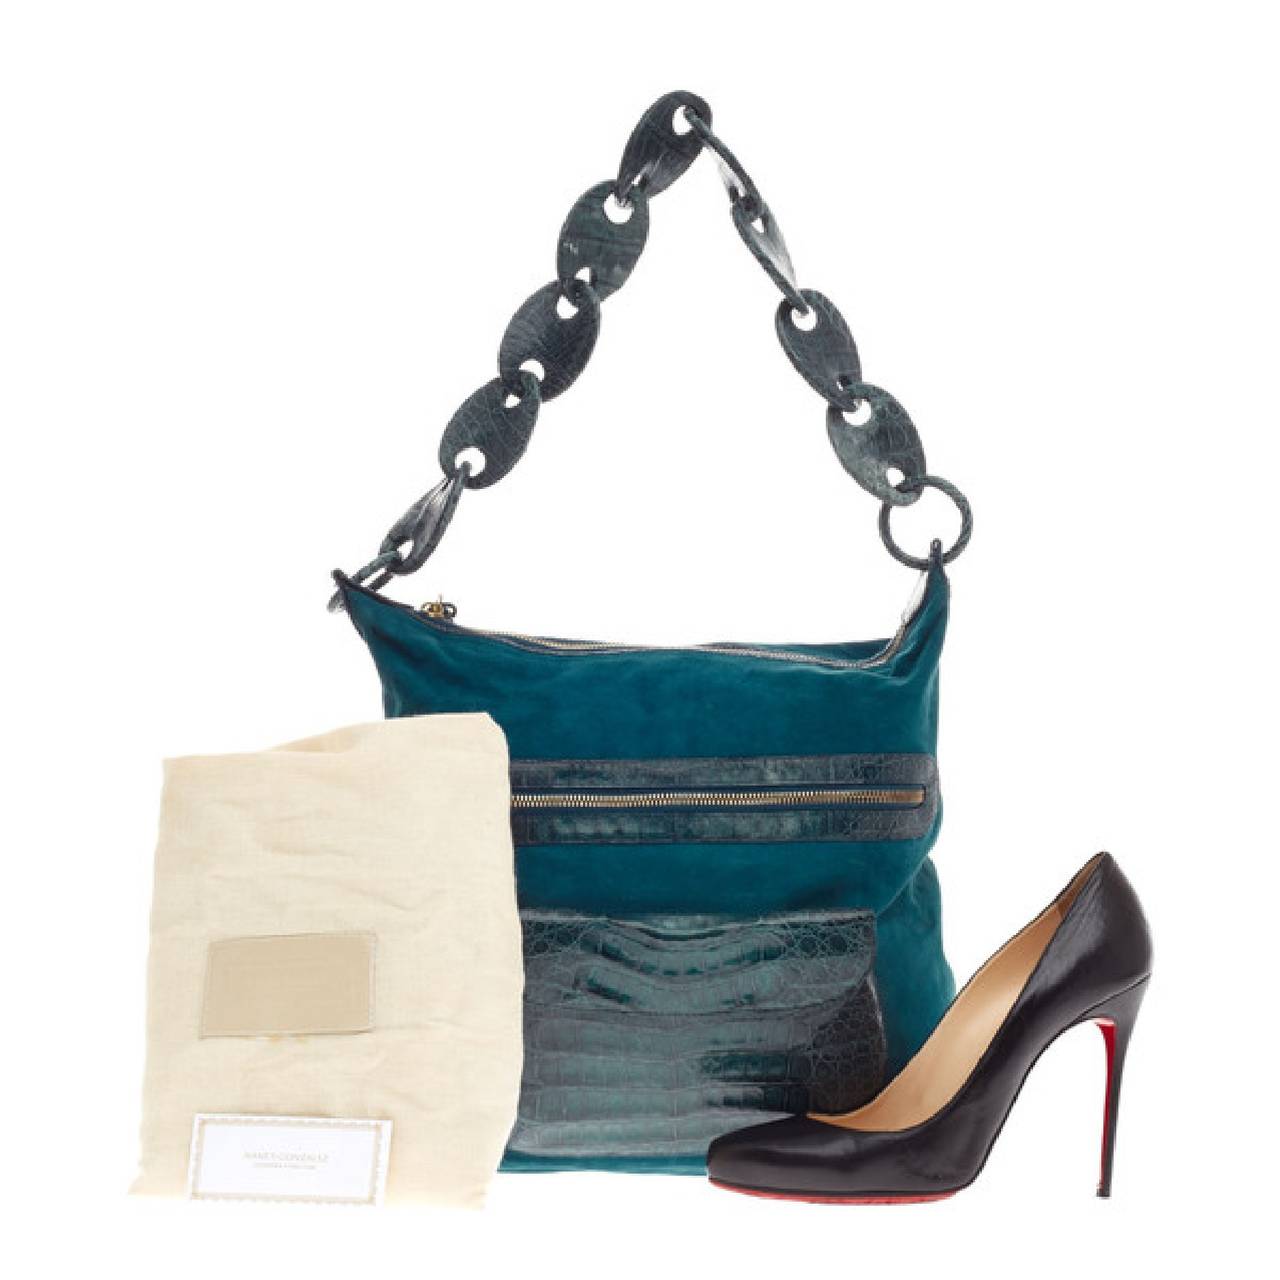 This authentic Nancy Gonzalez Front Pocket Hobo Crocodile and Suede showcases a casual elegance synonymous with the brand. This exotic hobo shoulder bag is crafted with a beautiful soft blue toned suede and accented with blue crocodile skin. The bag